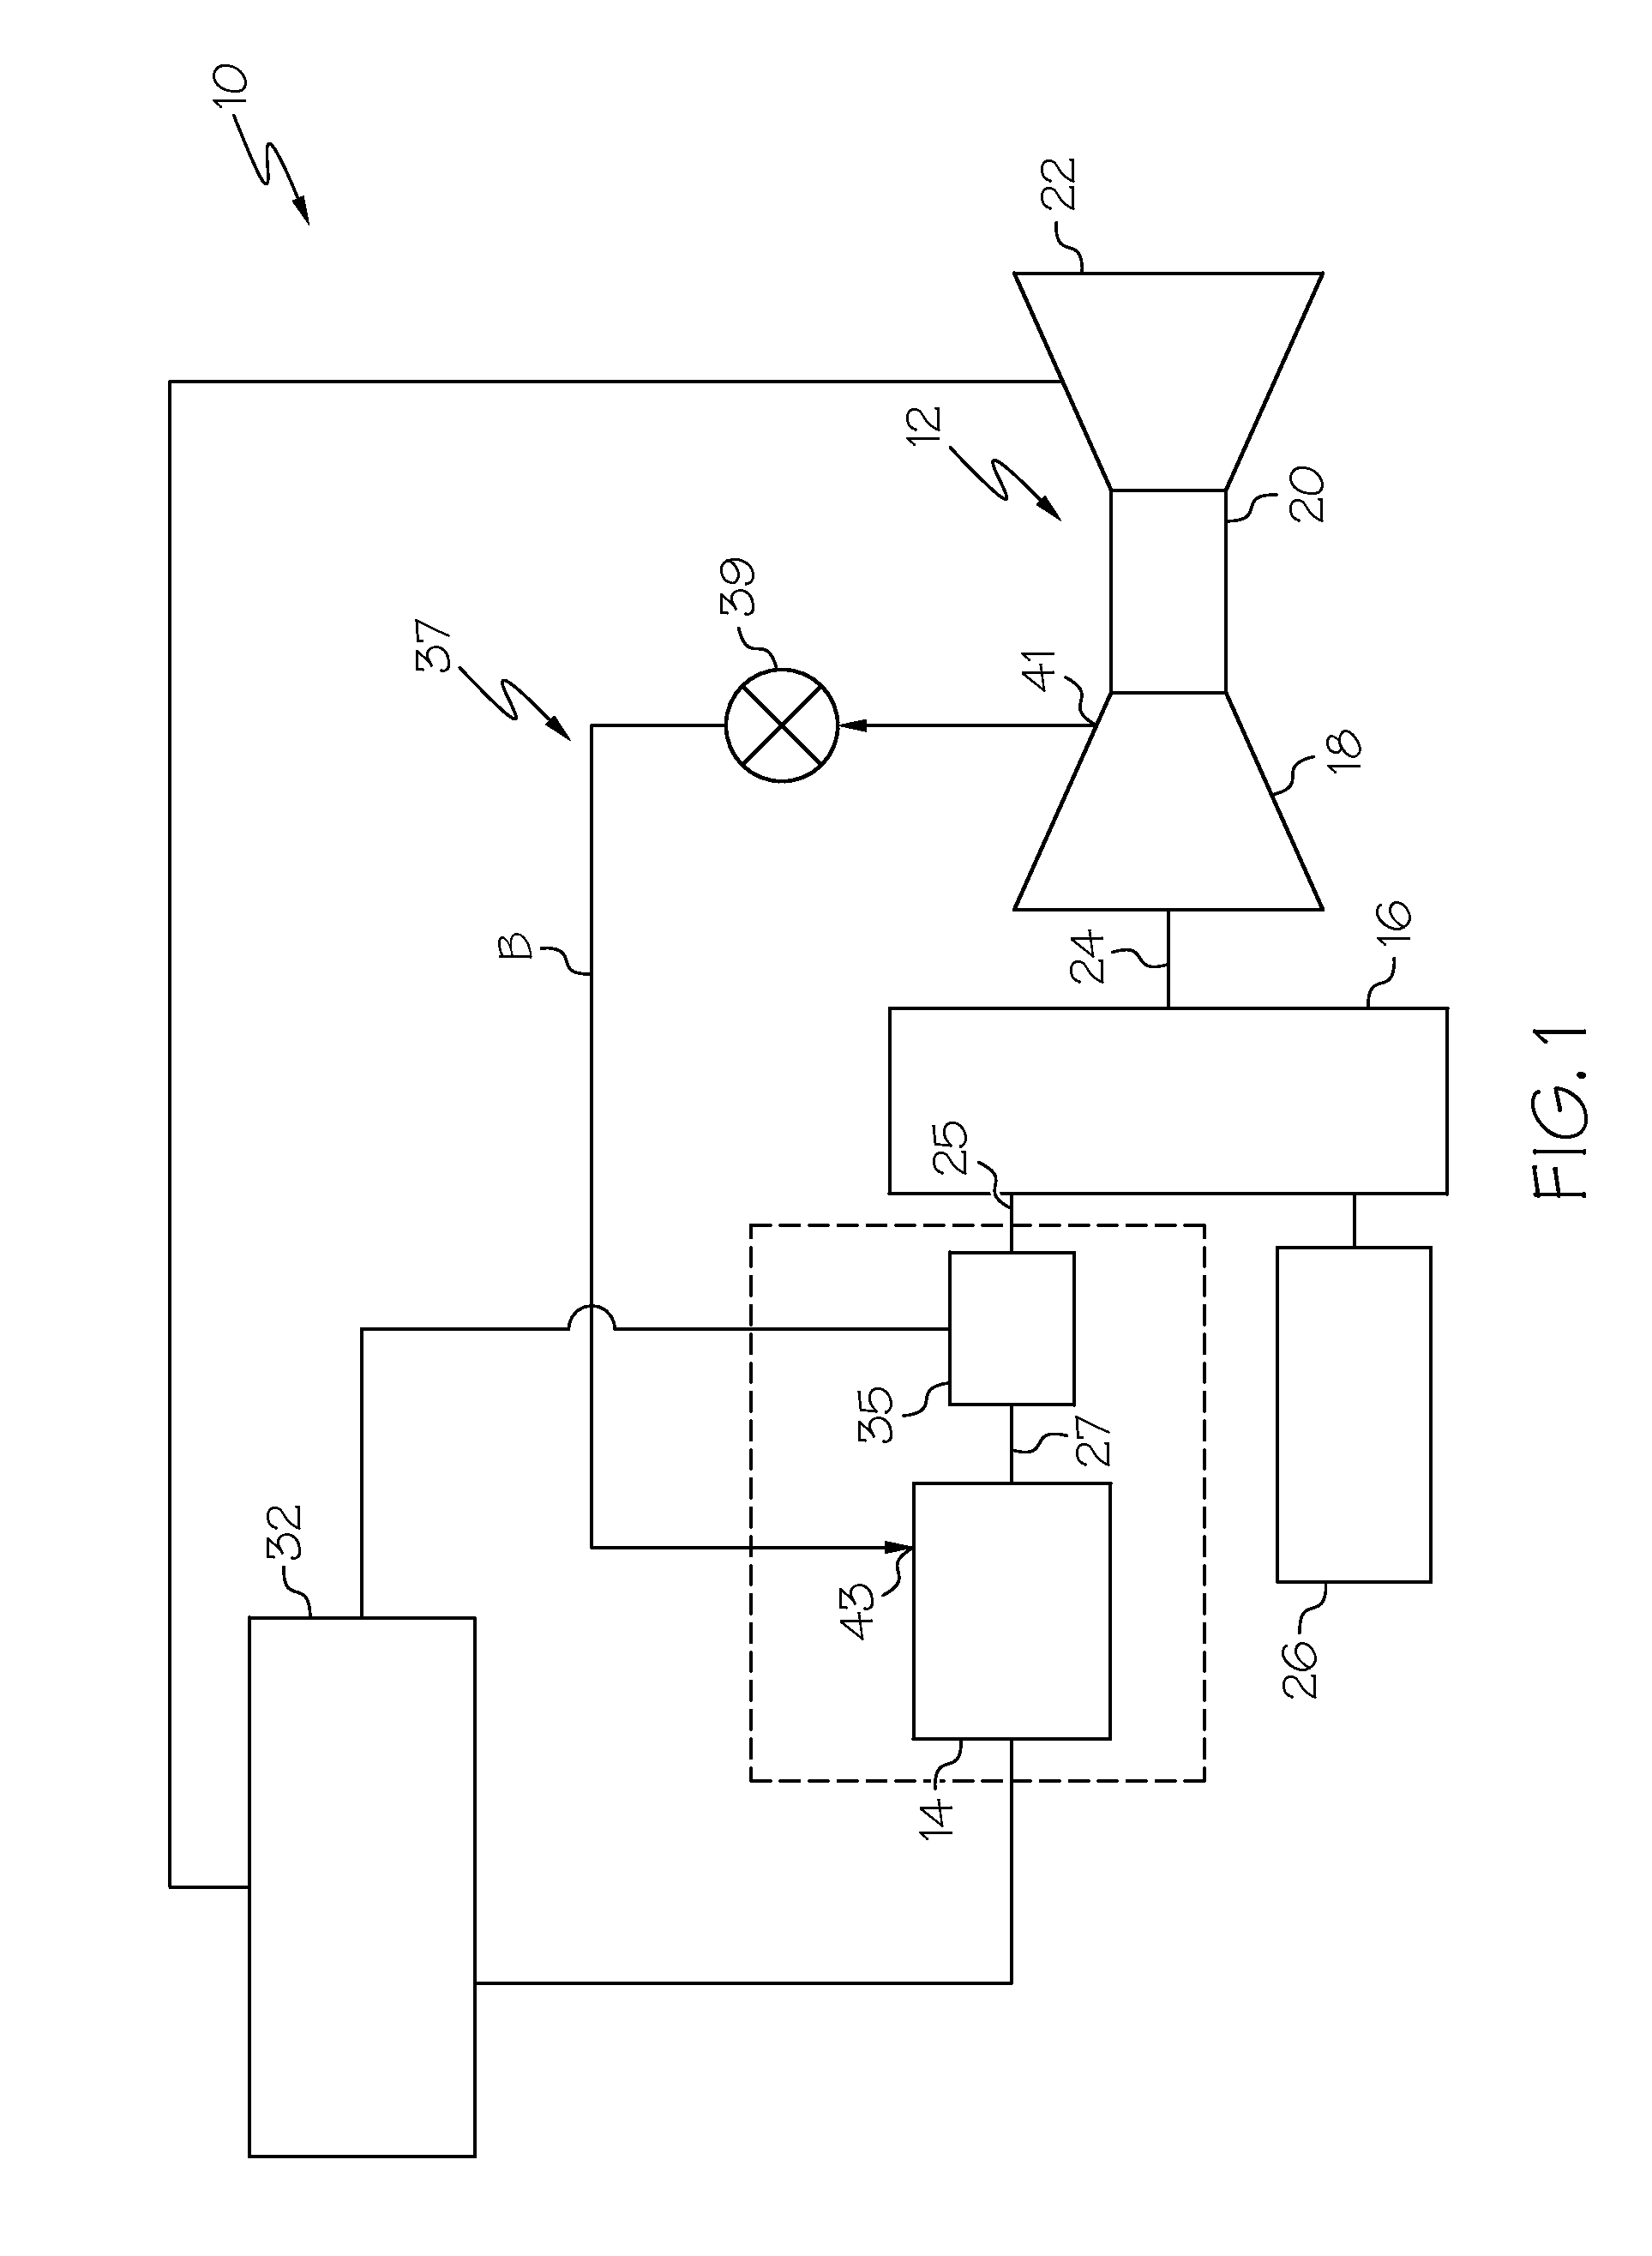 AUXILIARY POWER UNITS (APUs) AND METHODS AND SYSTEMS FOR ACTIVATION AND DEACTIVATION OF A LOAD COMPRESSOR THEREIN